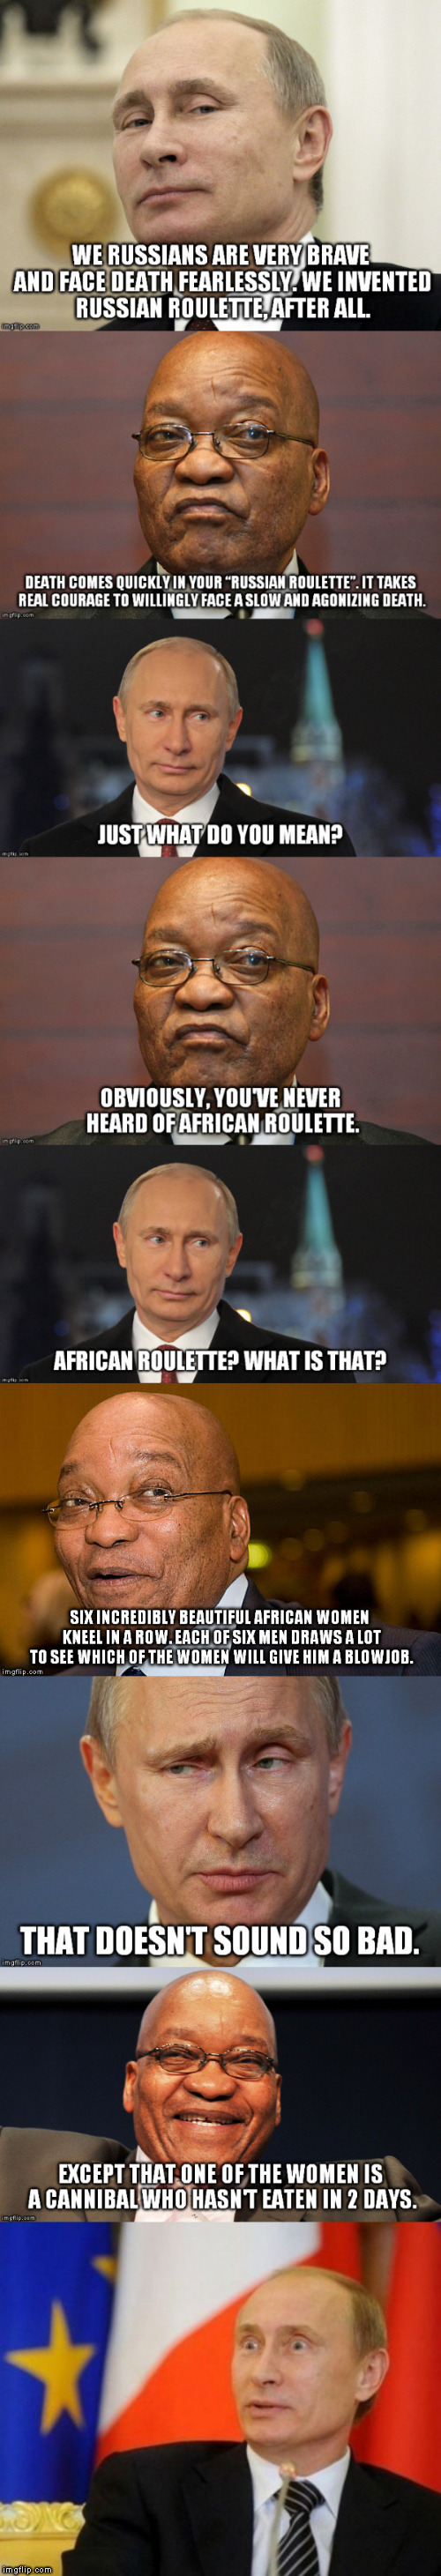 Have you heard about the new game that's trending? | image tagged in meme,african,russian roulette,vladimir putin,zuma | made w/ Imgflip meme maker